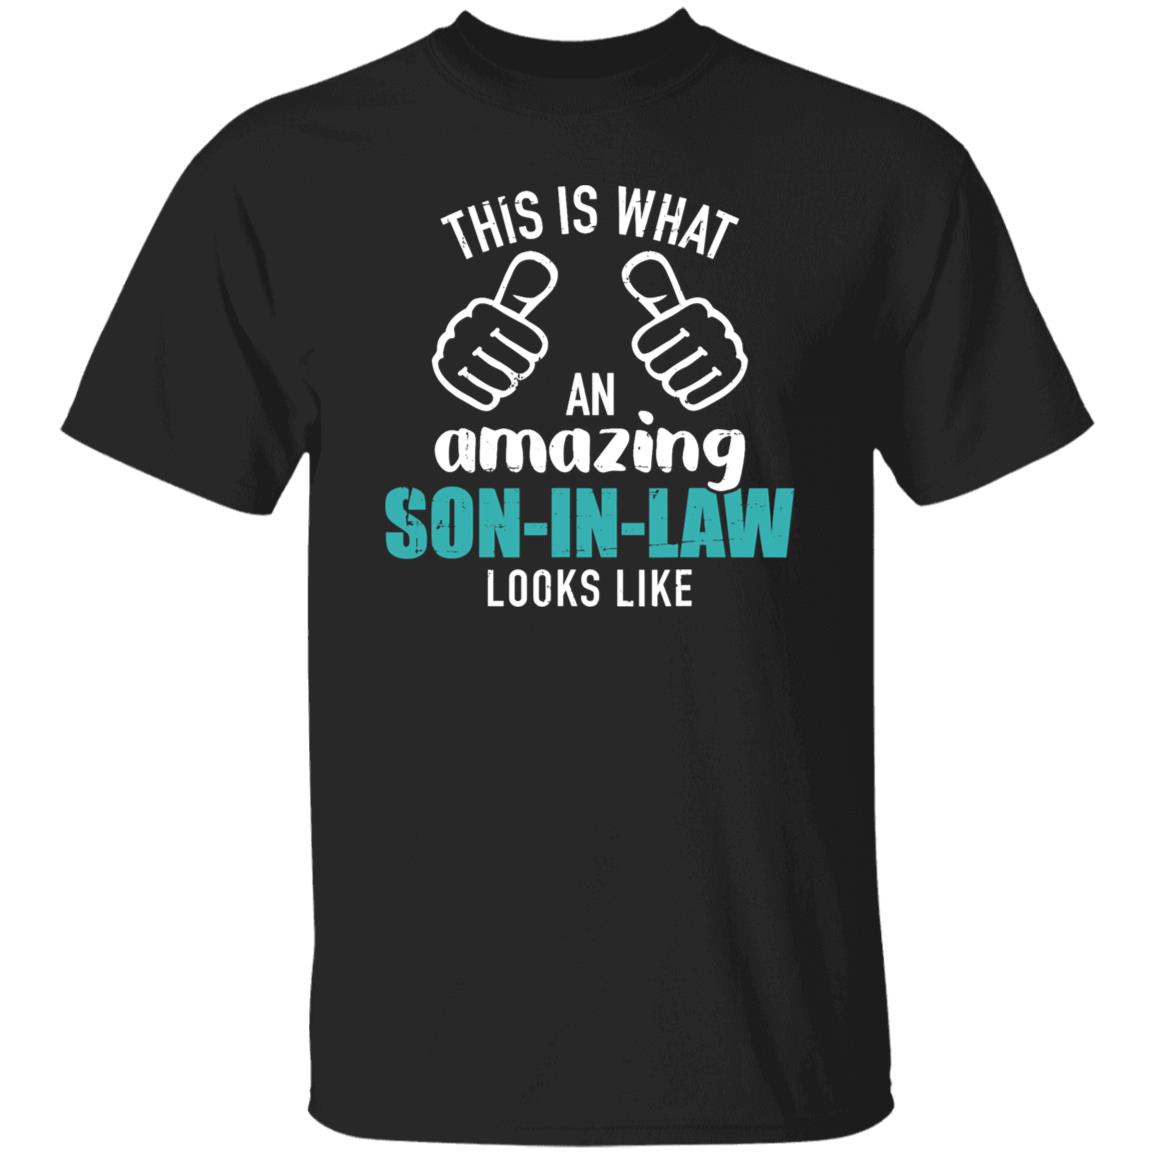 Mens This is What An Amazing Son-in-Law Looks Like Shirt